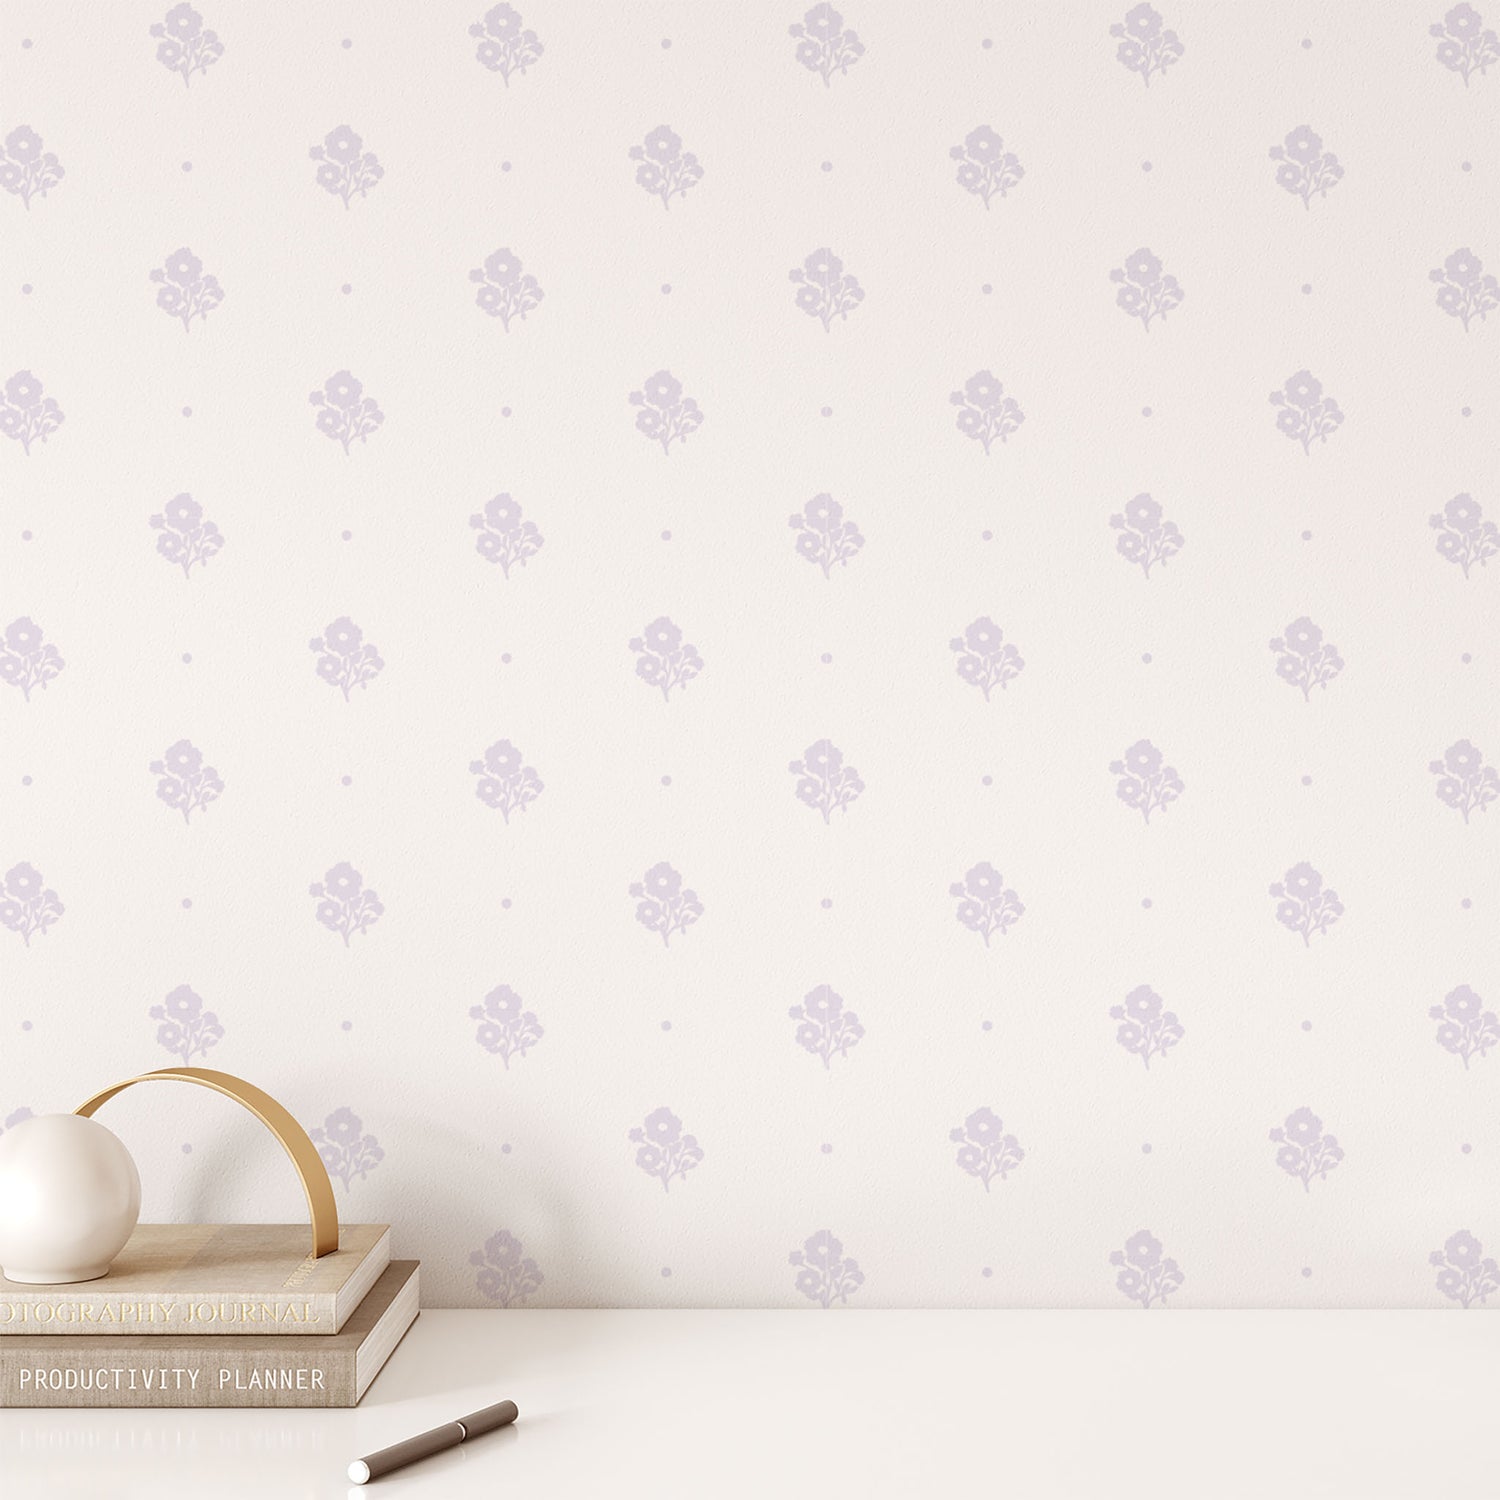 Elevate your home decor with our Cambridge Wallpaper in a sophisticated lavender shown in full size image.